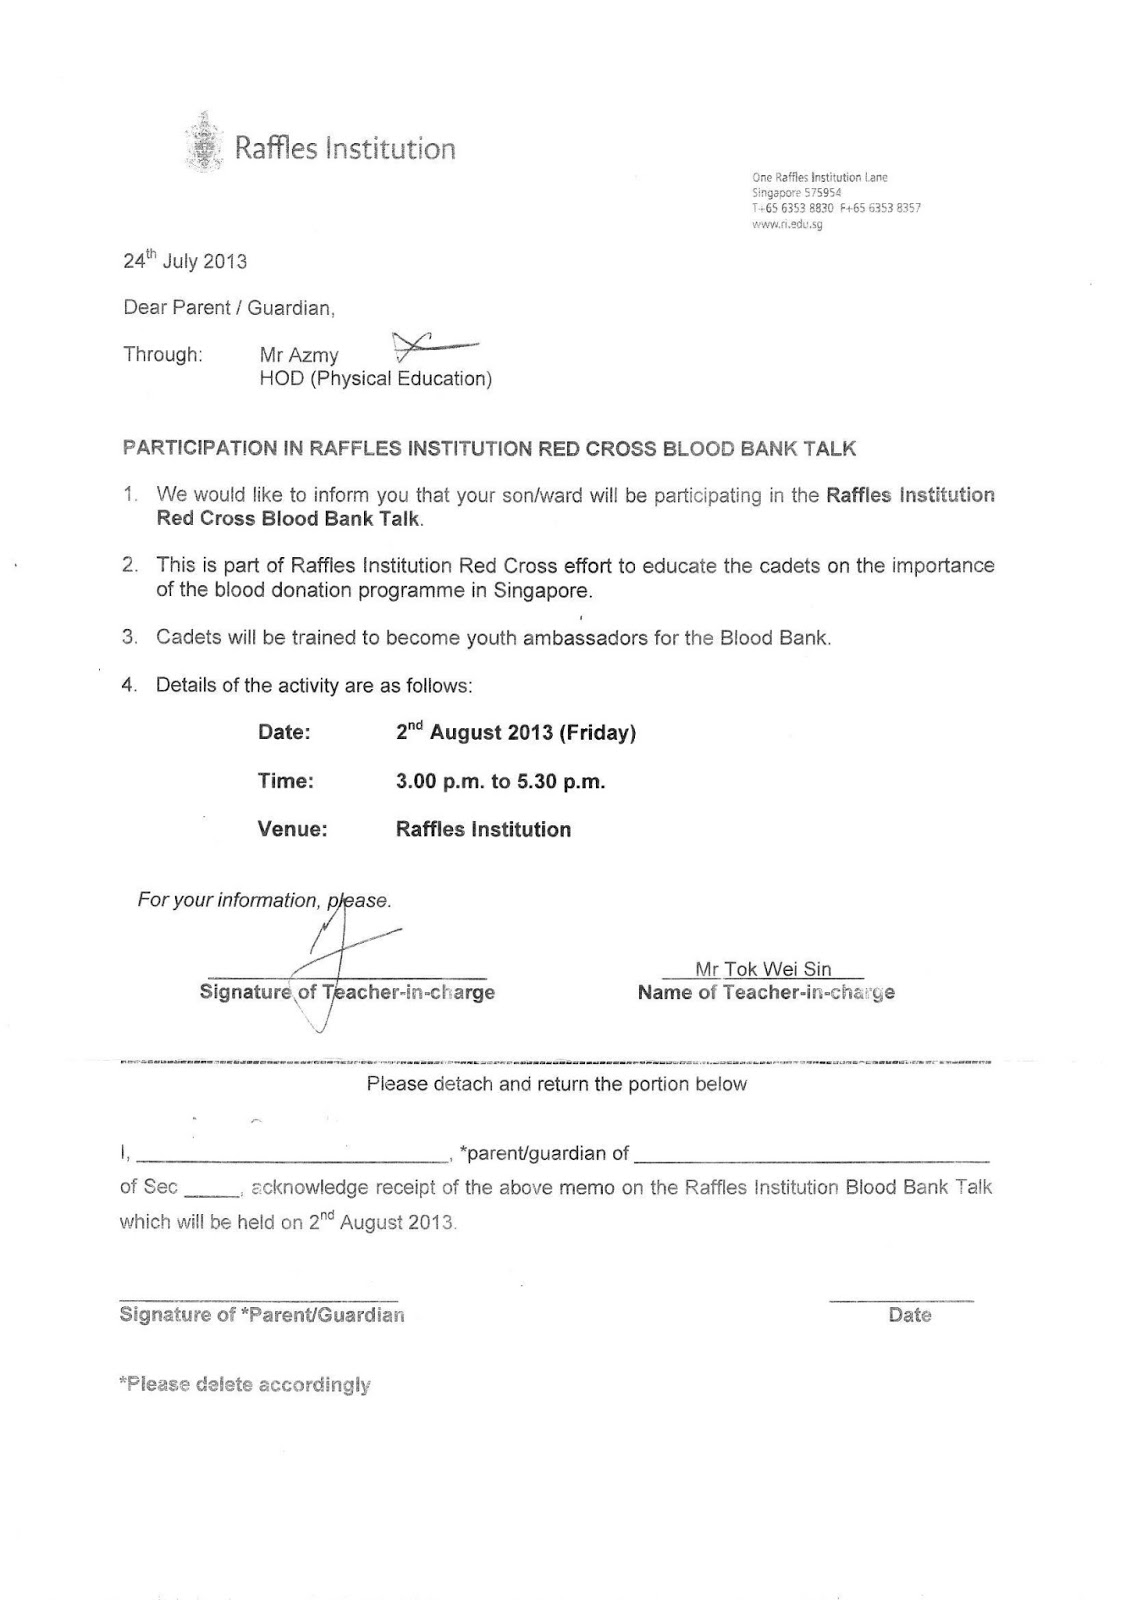 RIRC Consent Form For BloodBank Talk 2 Aug